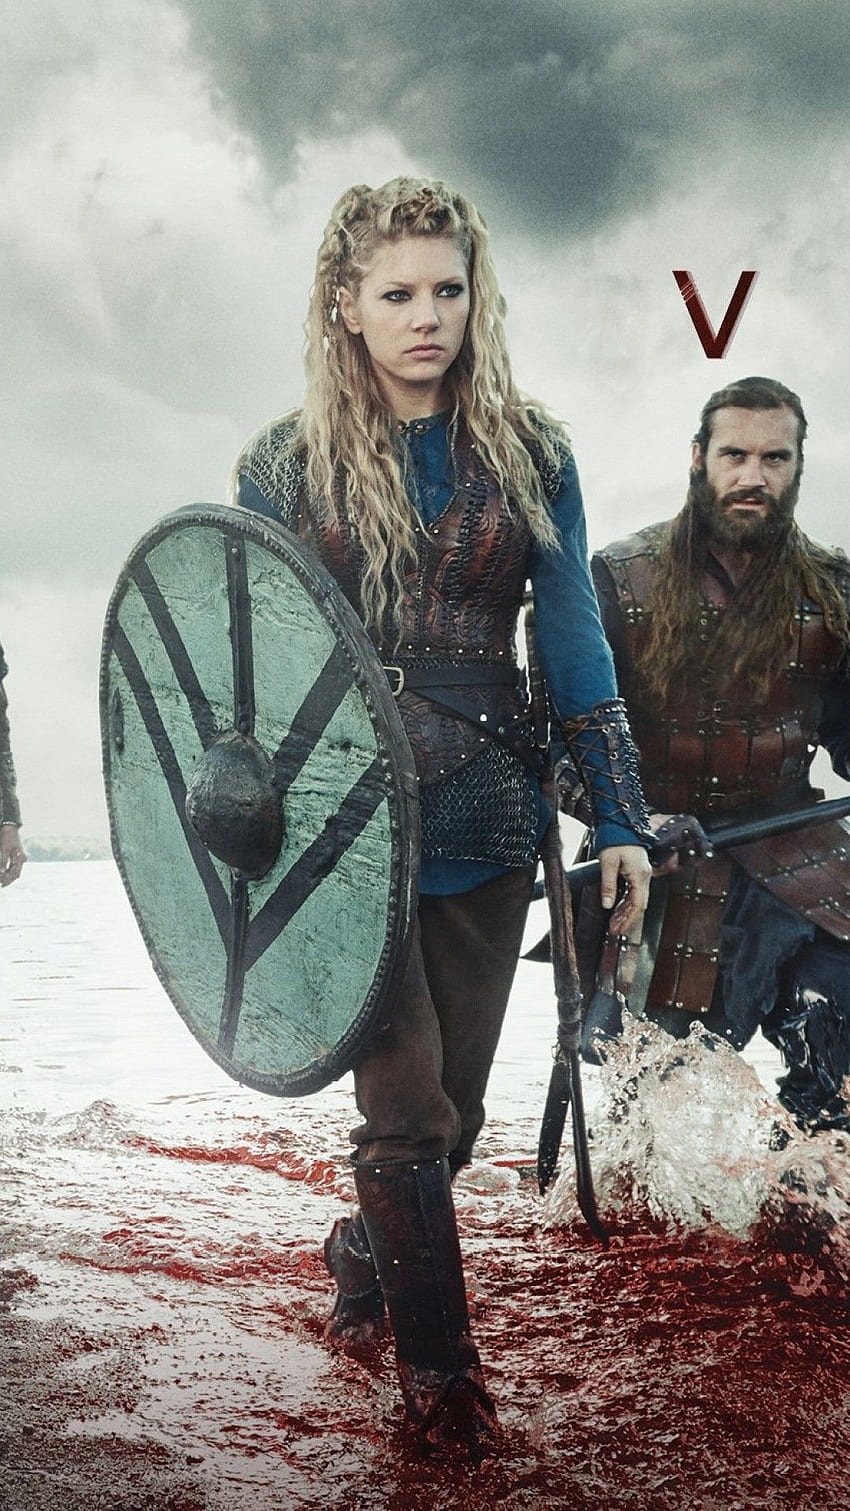 Vikings、Ragnar、Lagertha Lothbrok、Rollo、TV シリーズ for iPhone 8、iPhone 7 Plus、iPhone 6+、Sony Xperia Z、HTC One - Maiden HD電話の壁紙